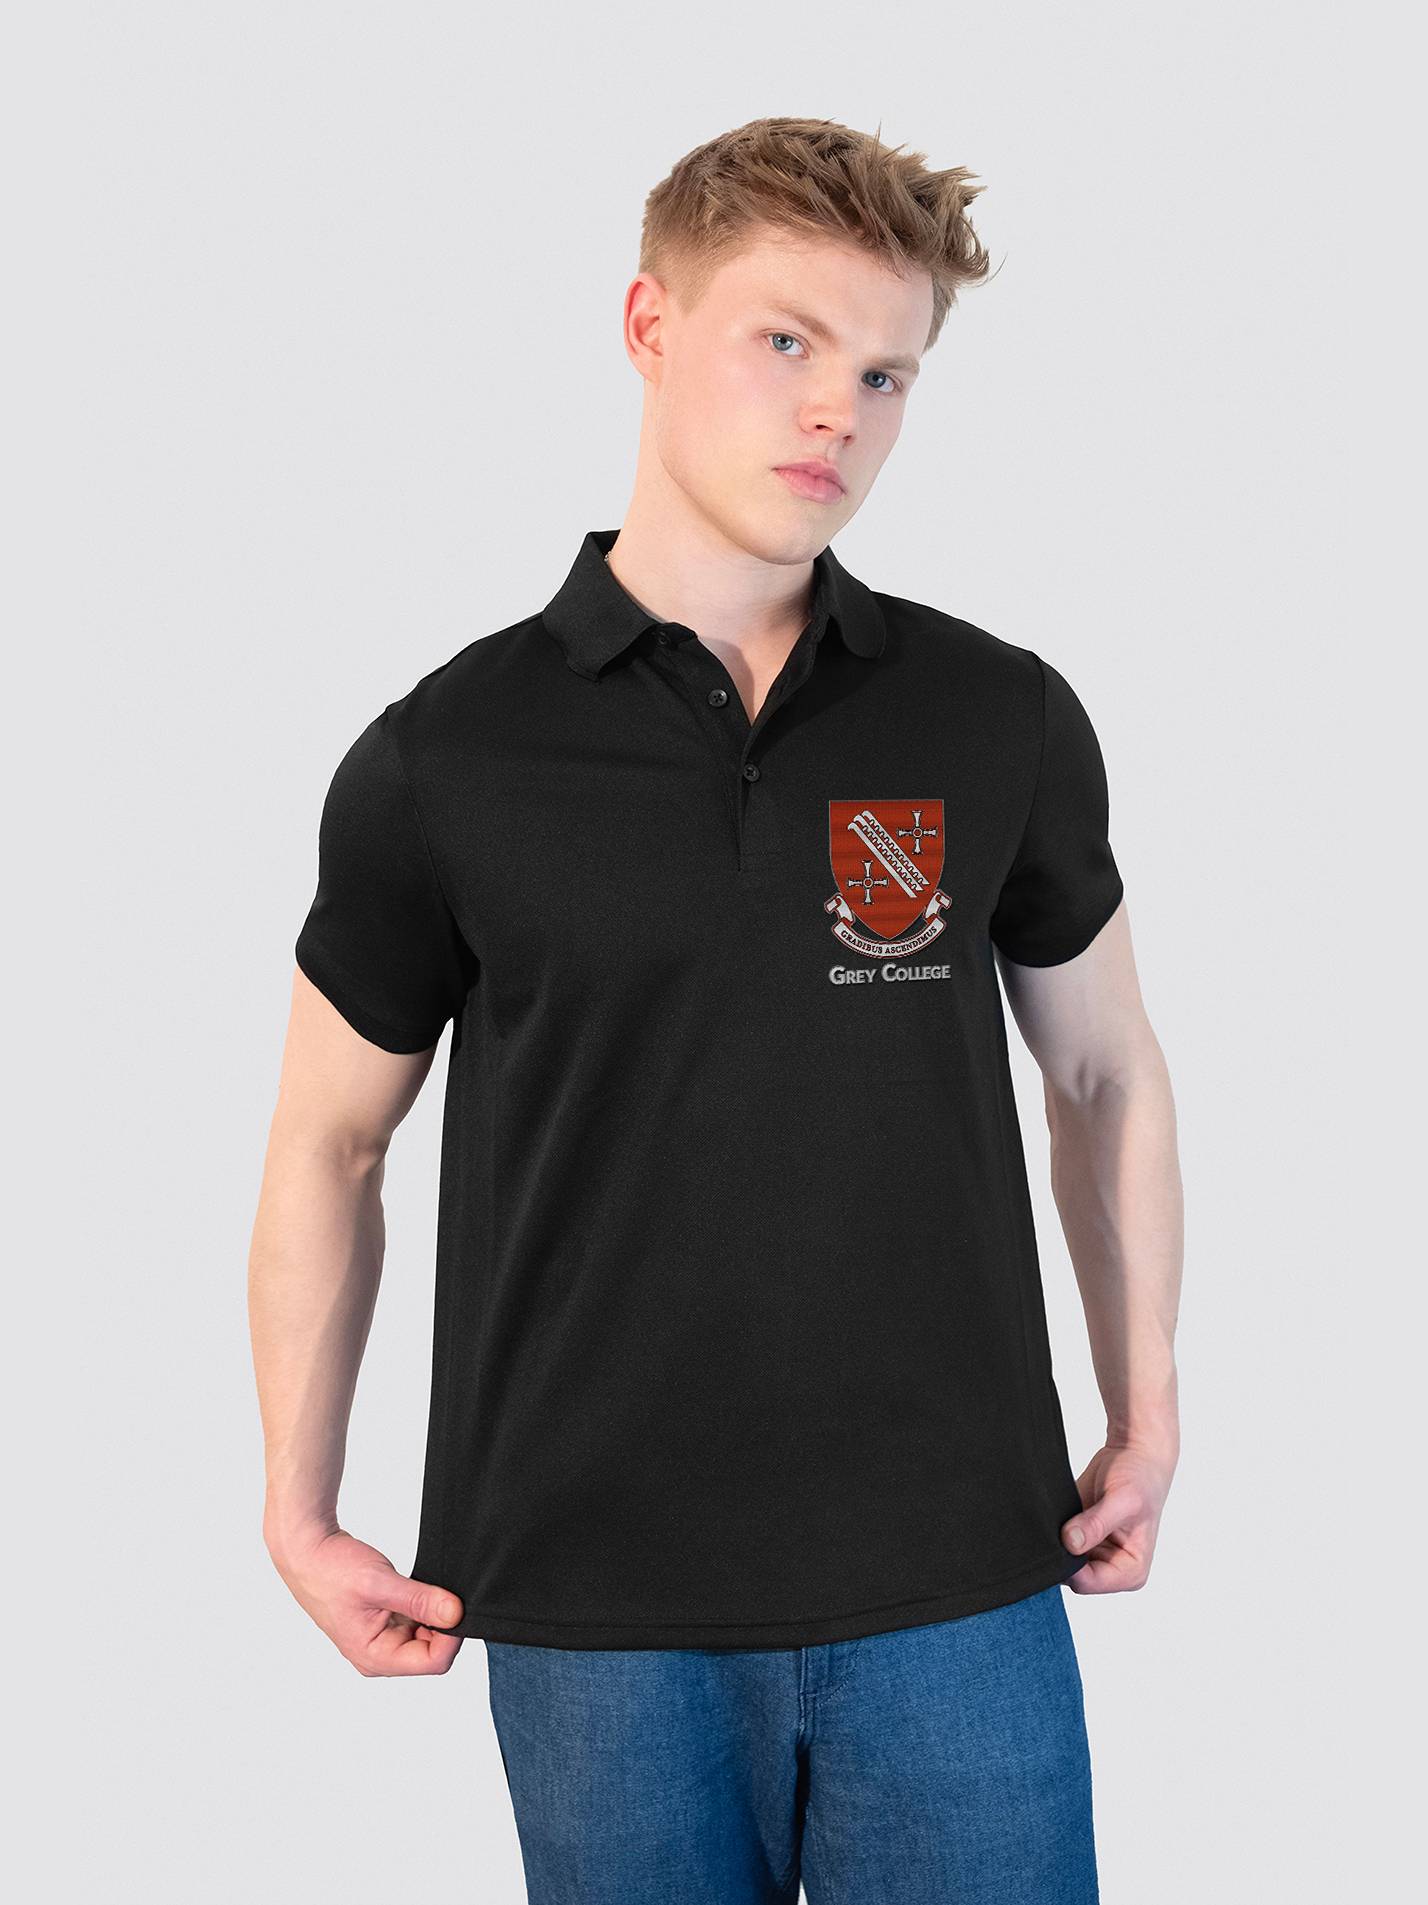 Grey College Durham Sustainable Men's Polo Shirt